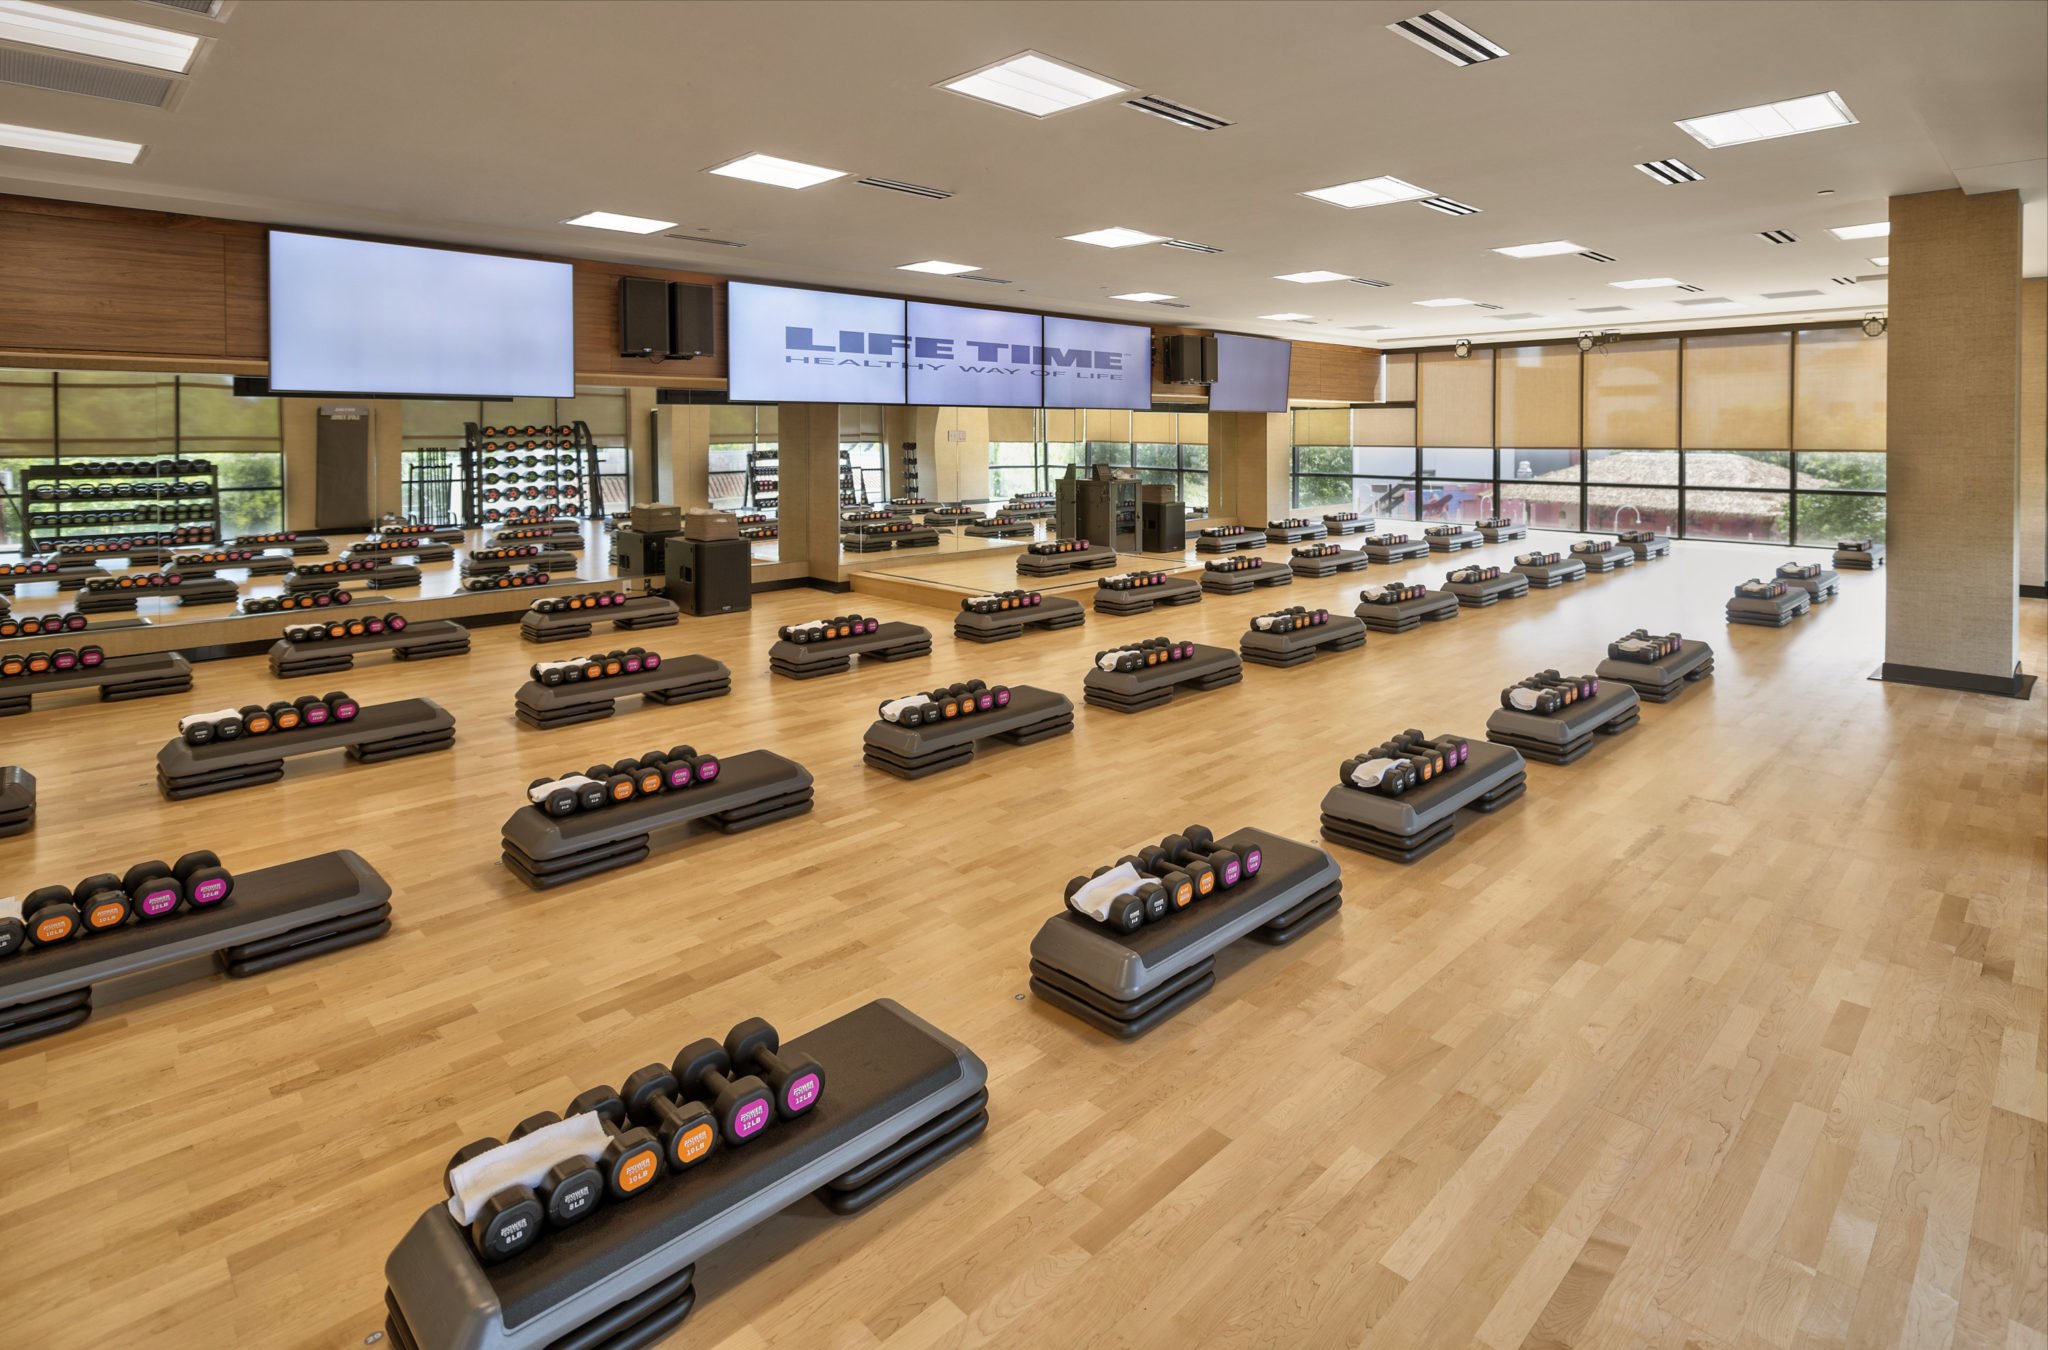 A group fitness studio at Life Time Clarendon. Photo by Fredde Lieberman.